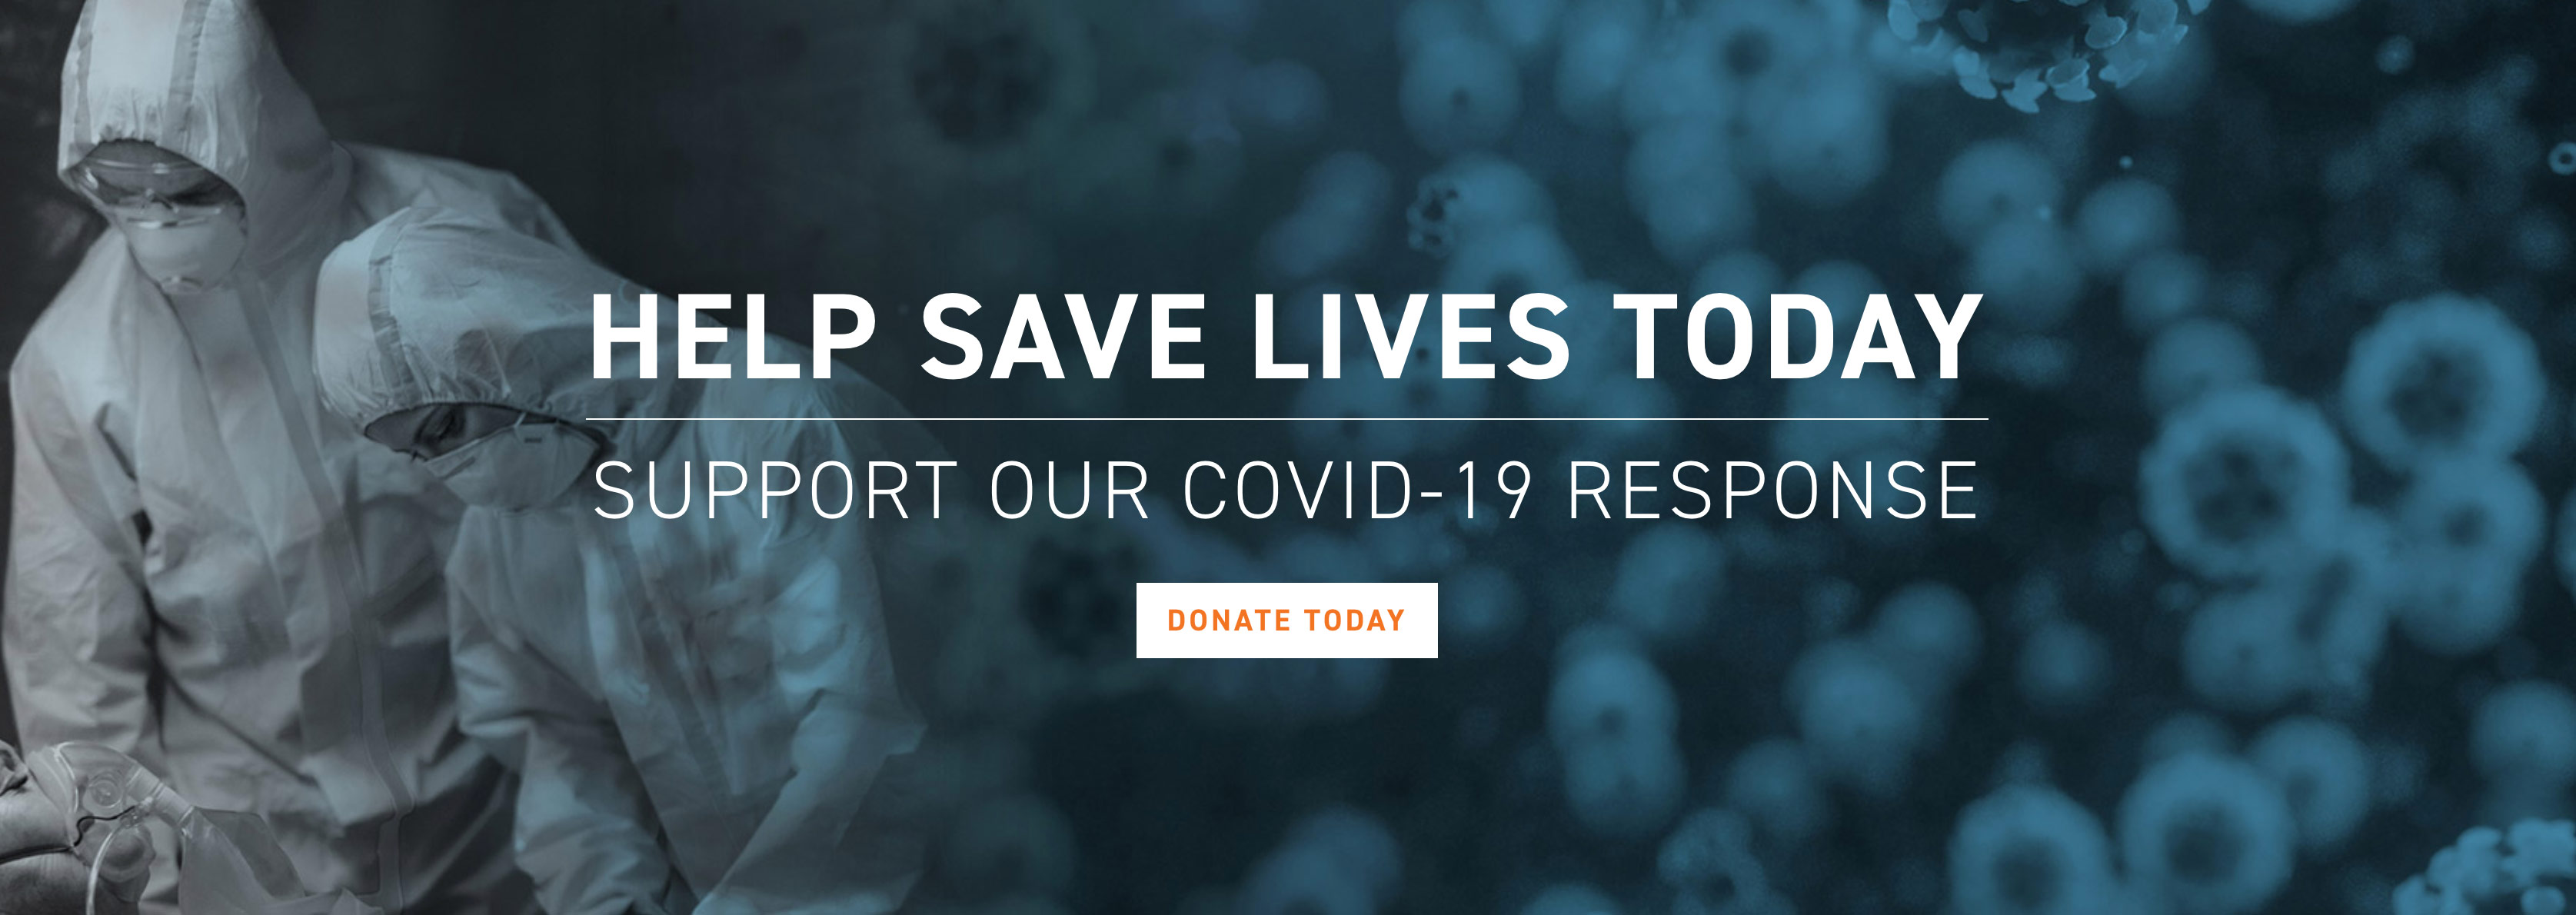 HELP SAVE LIVES TODAY: Support our COVID-19 Response | University of